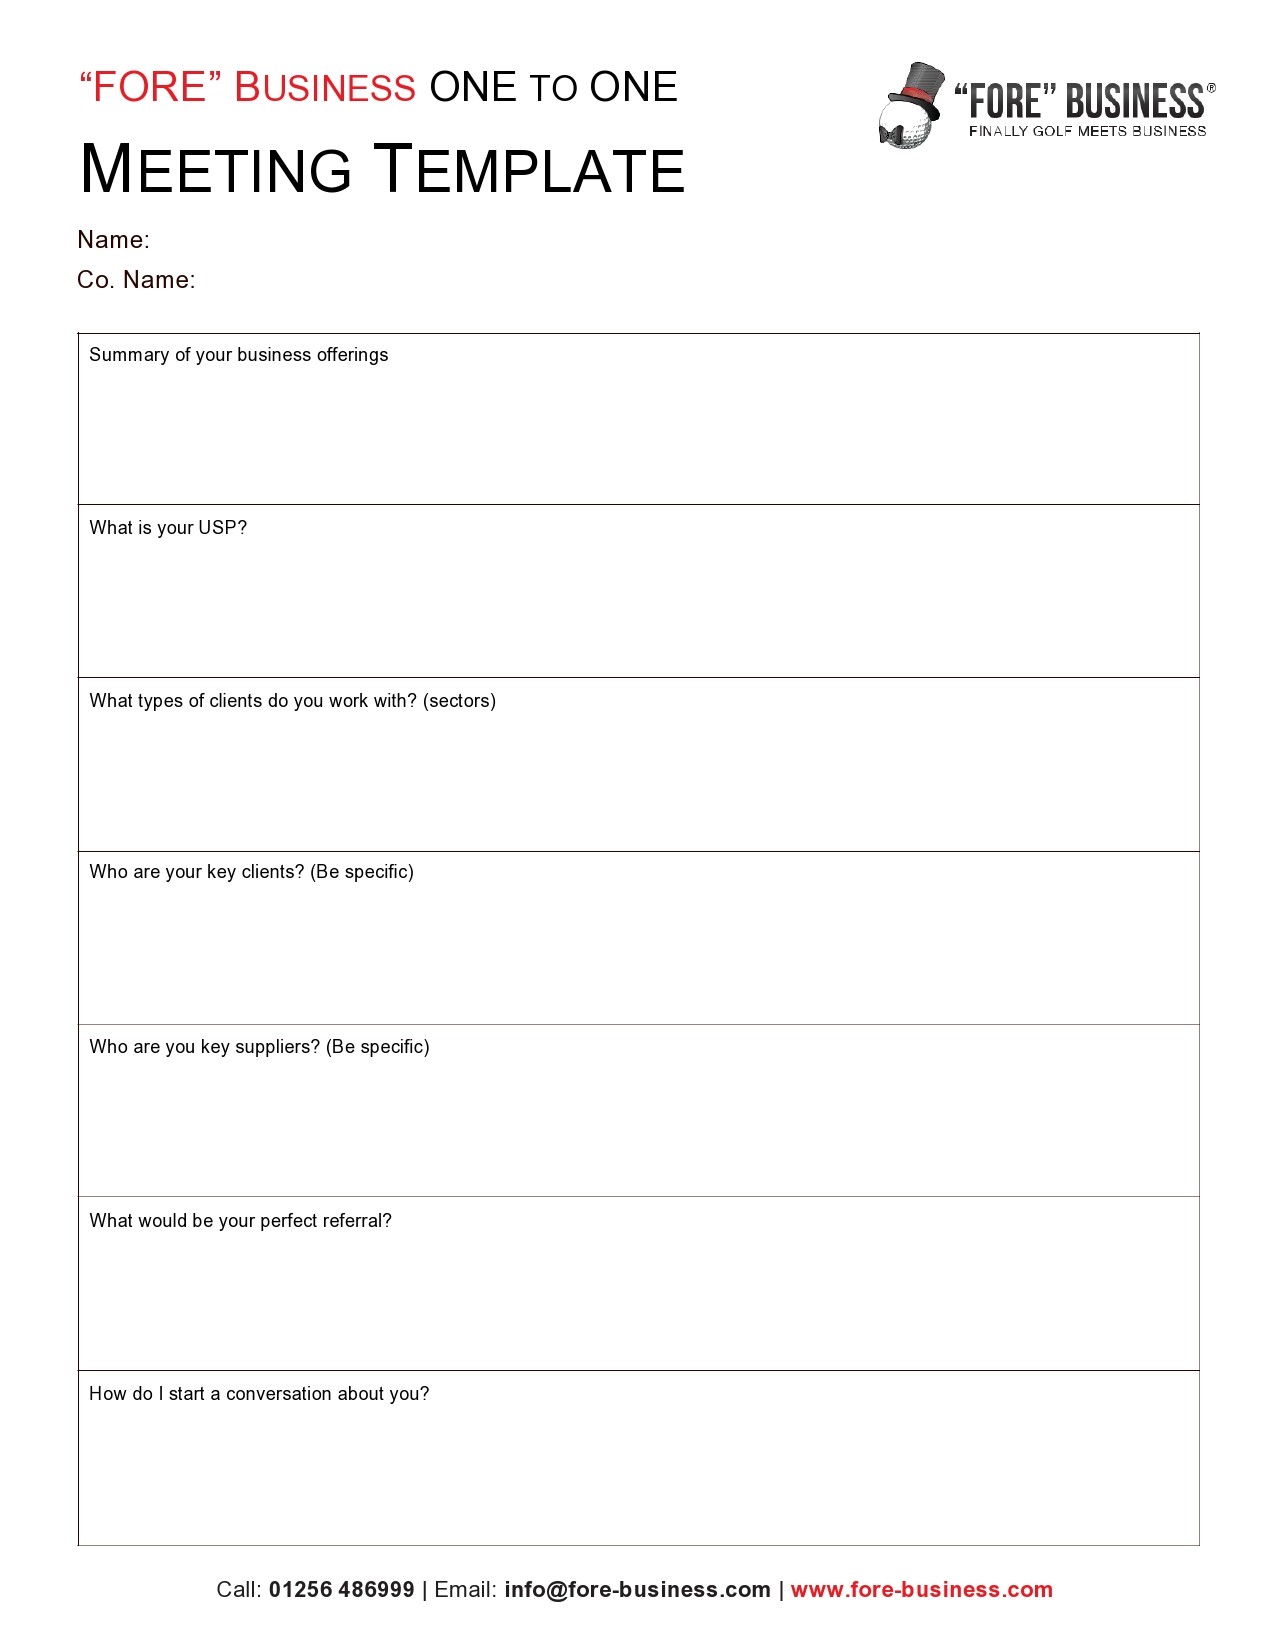 Free one to one meeting template 01